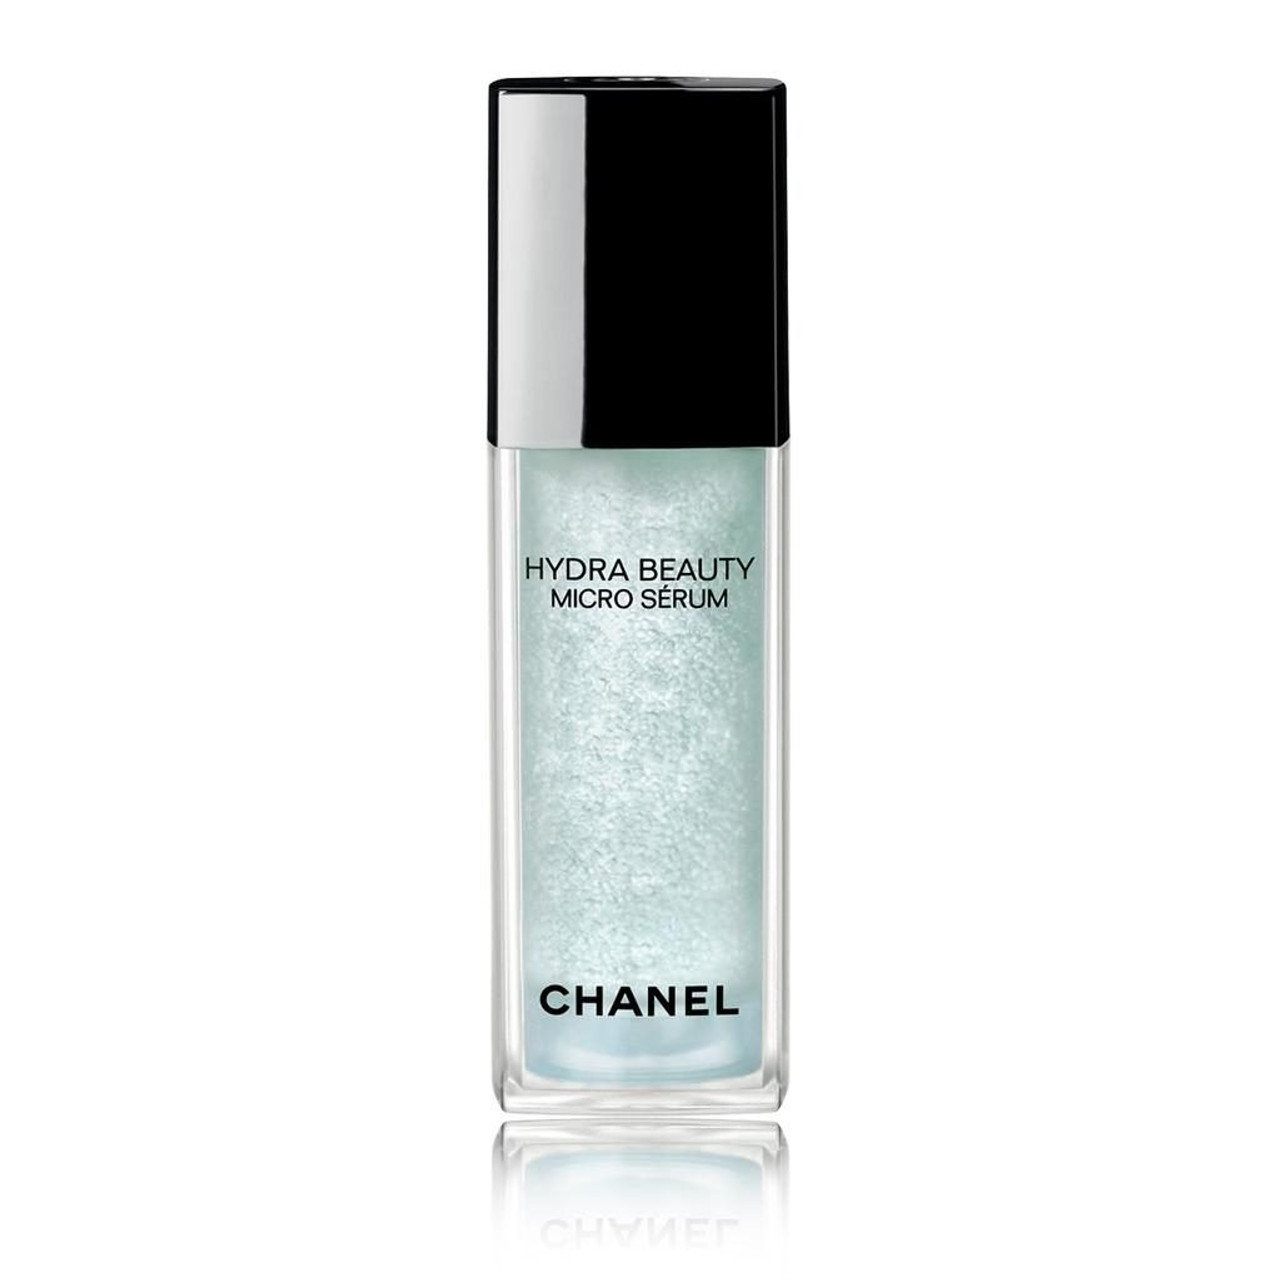 Chanel Hydra Beauty Micro Cream Hydratant Repulpant Fortifiant 50g/1.7oz  buy to India.India CosmoStore